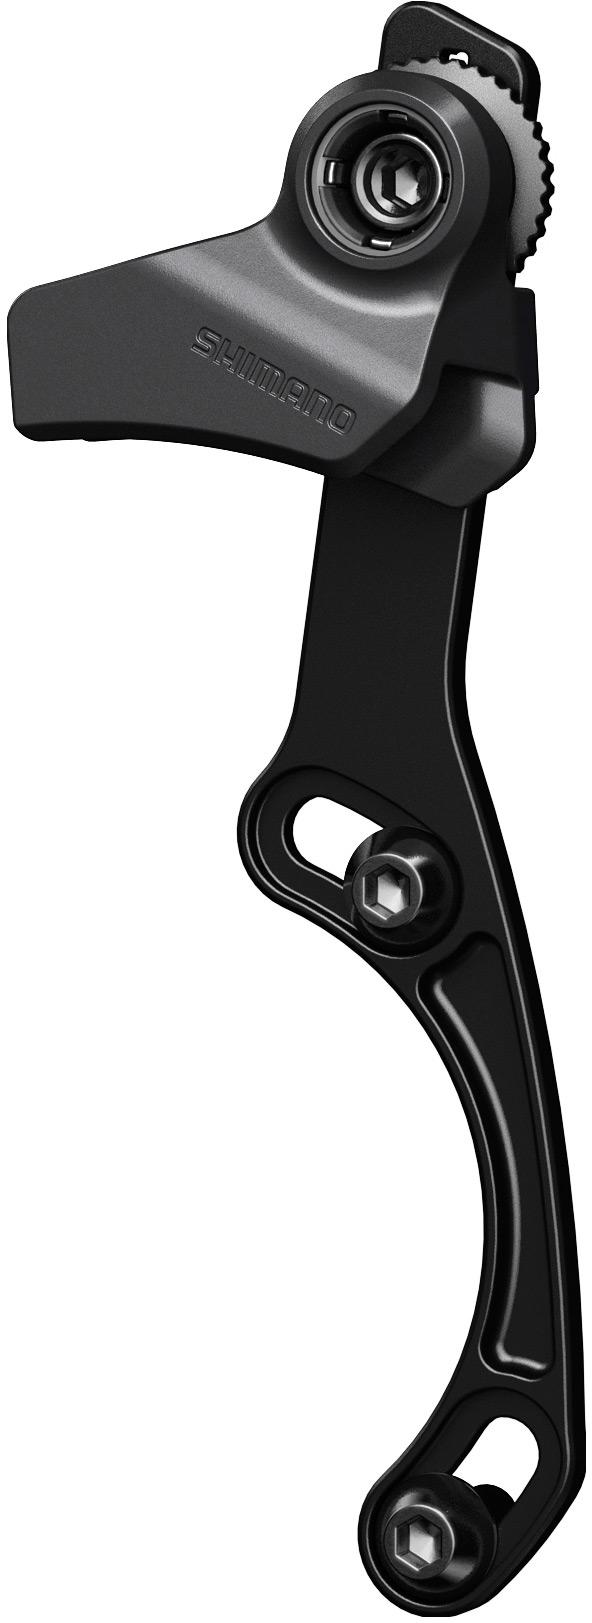 Shimano Xtr Cd800 Front Chain Device  Black